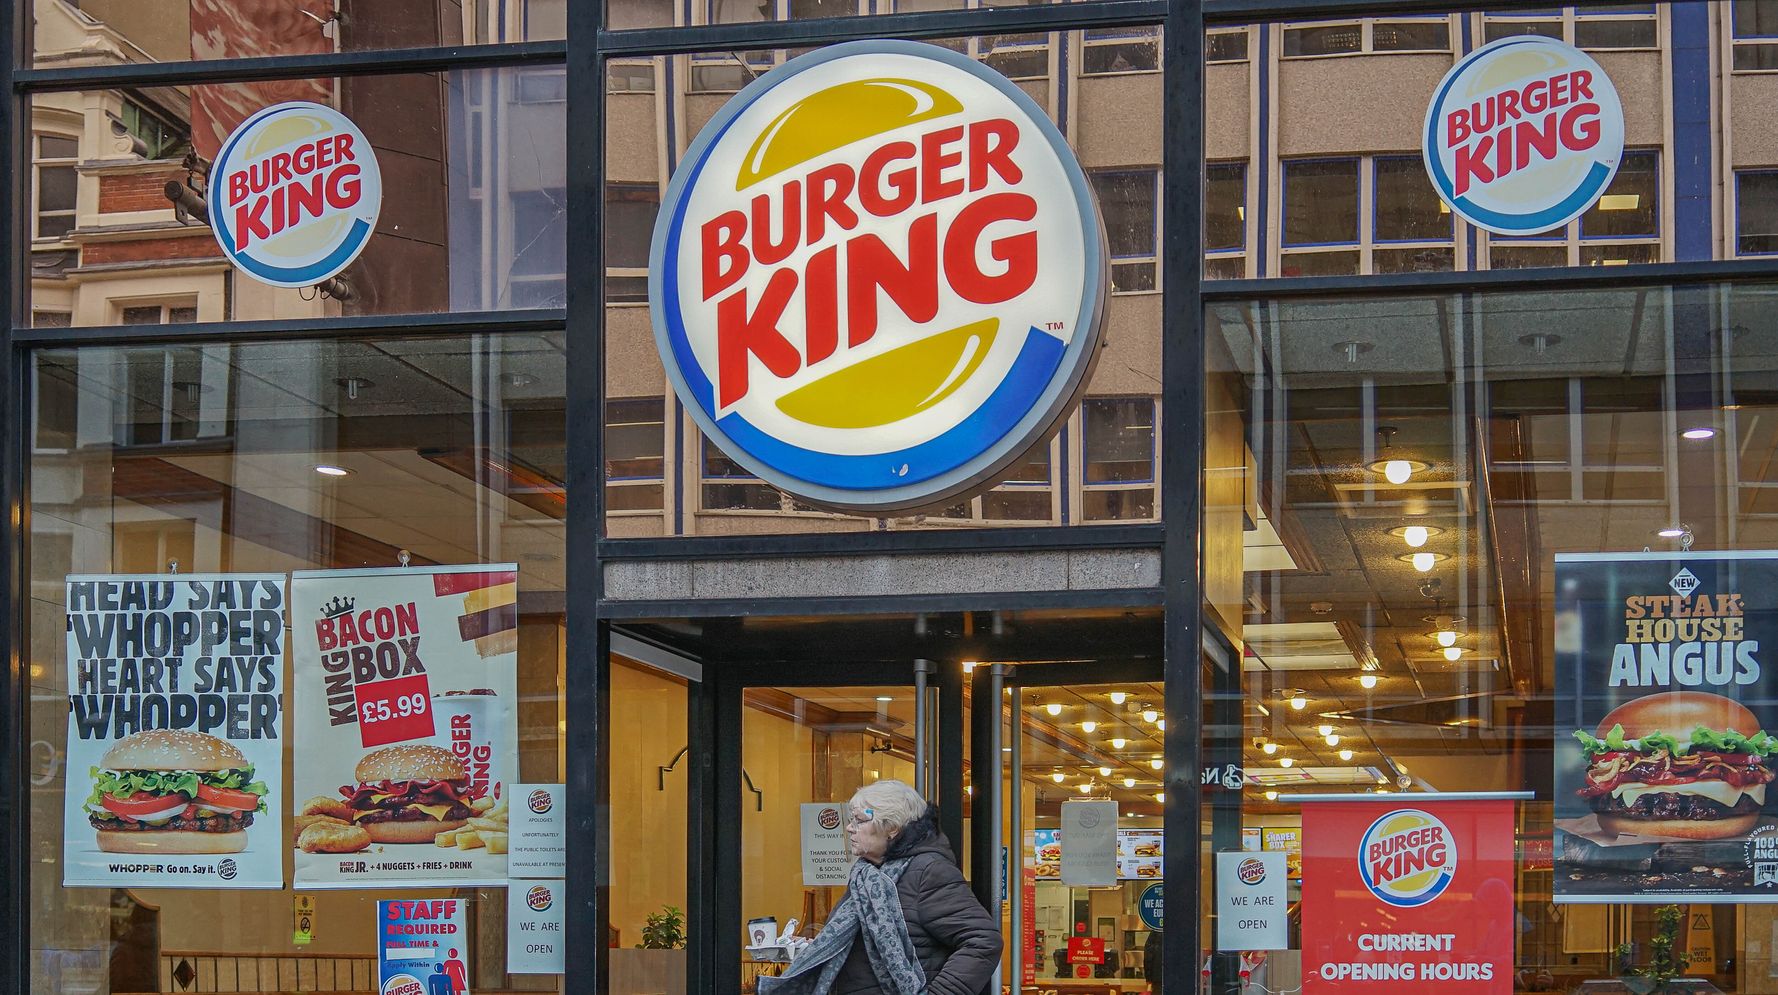 Burger King apologizes for rioting over ‘Women belong in the kitchen’ Tweet